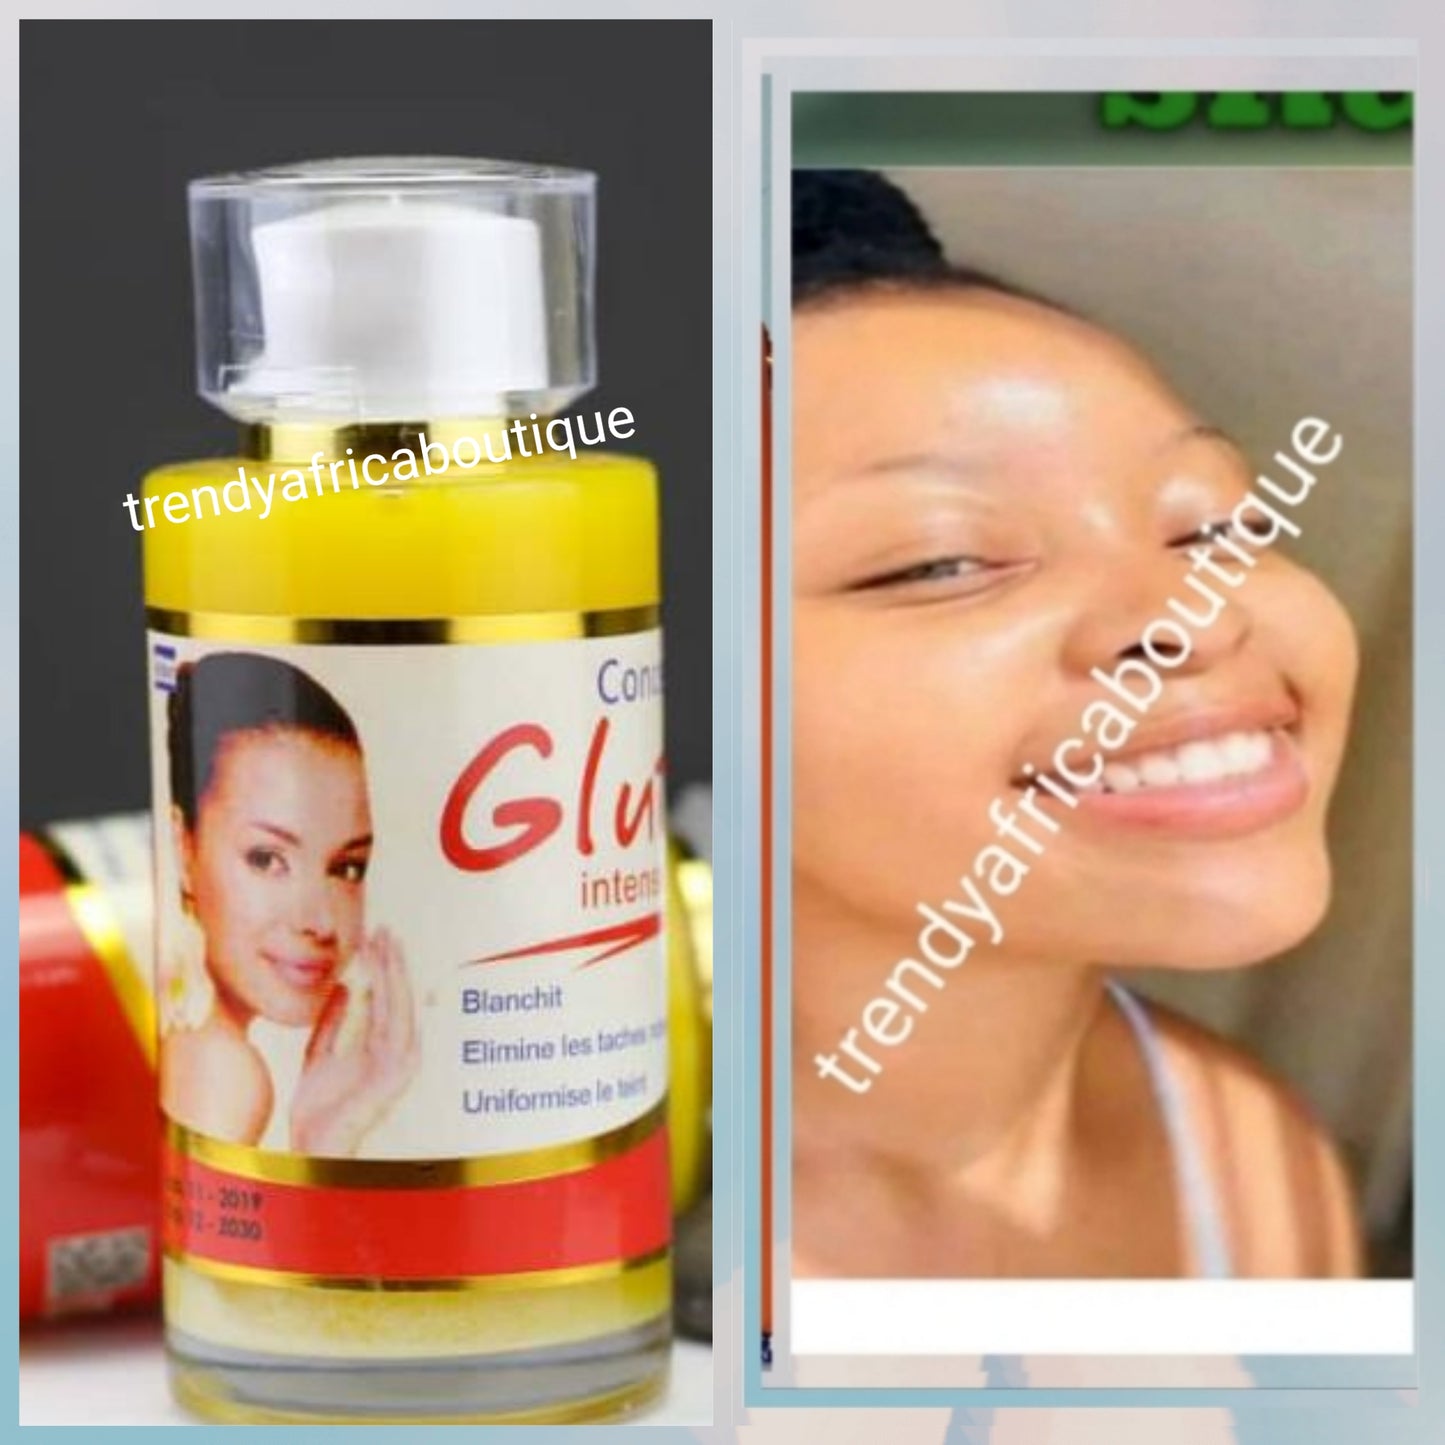 Gluta C concentrate intense whitening and glowing Serum/oil. 120ml bottle. Gives Beautiful yellow undertone